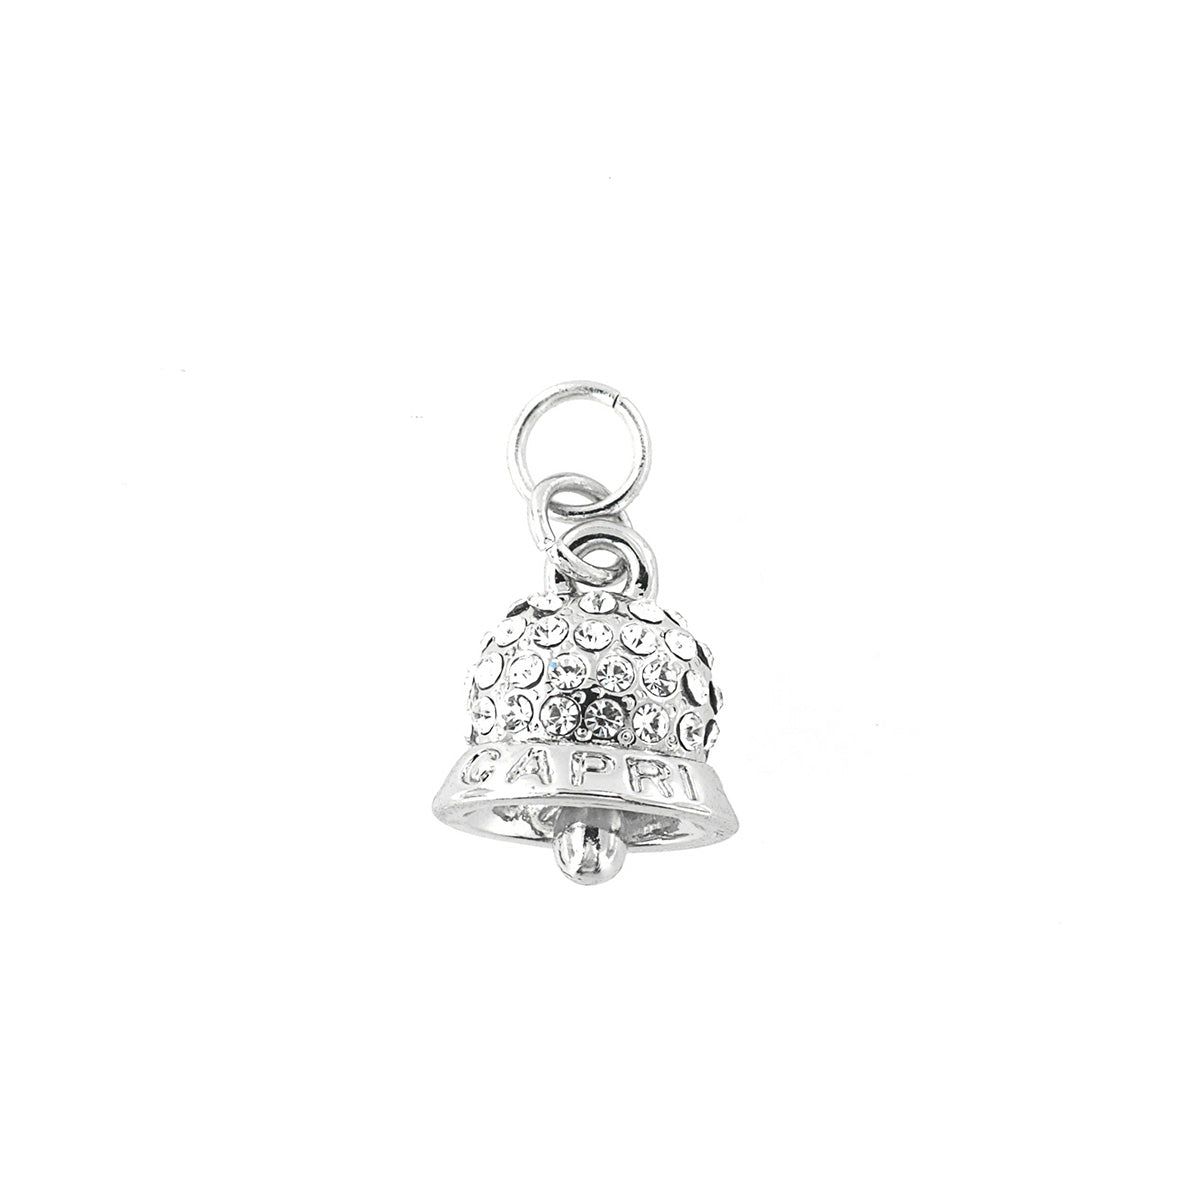 Metal pendant charming bell embellished with crystals